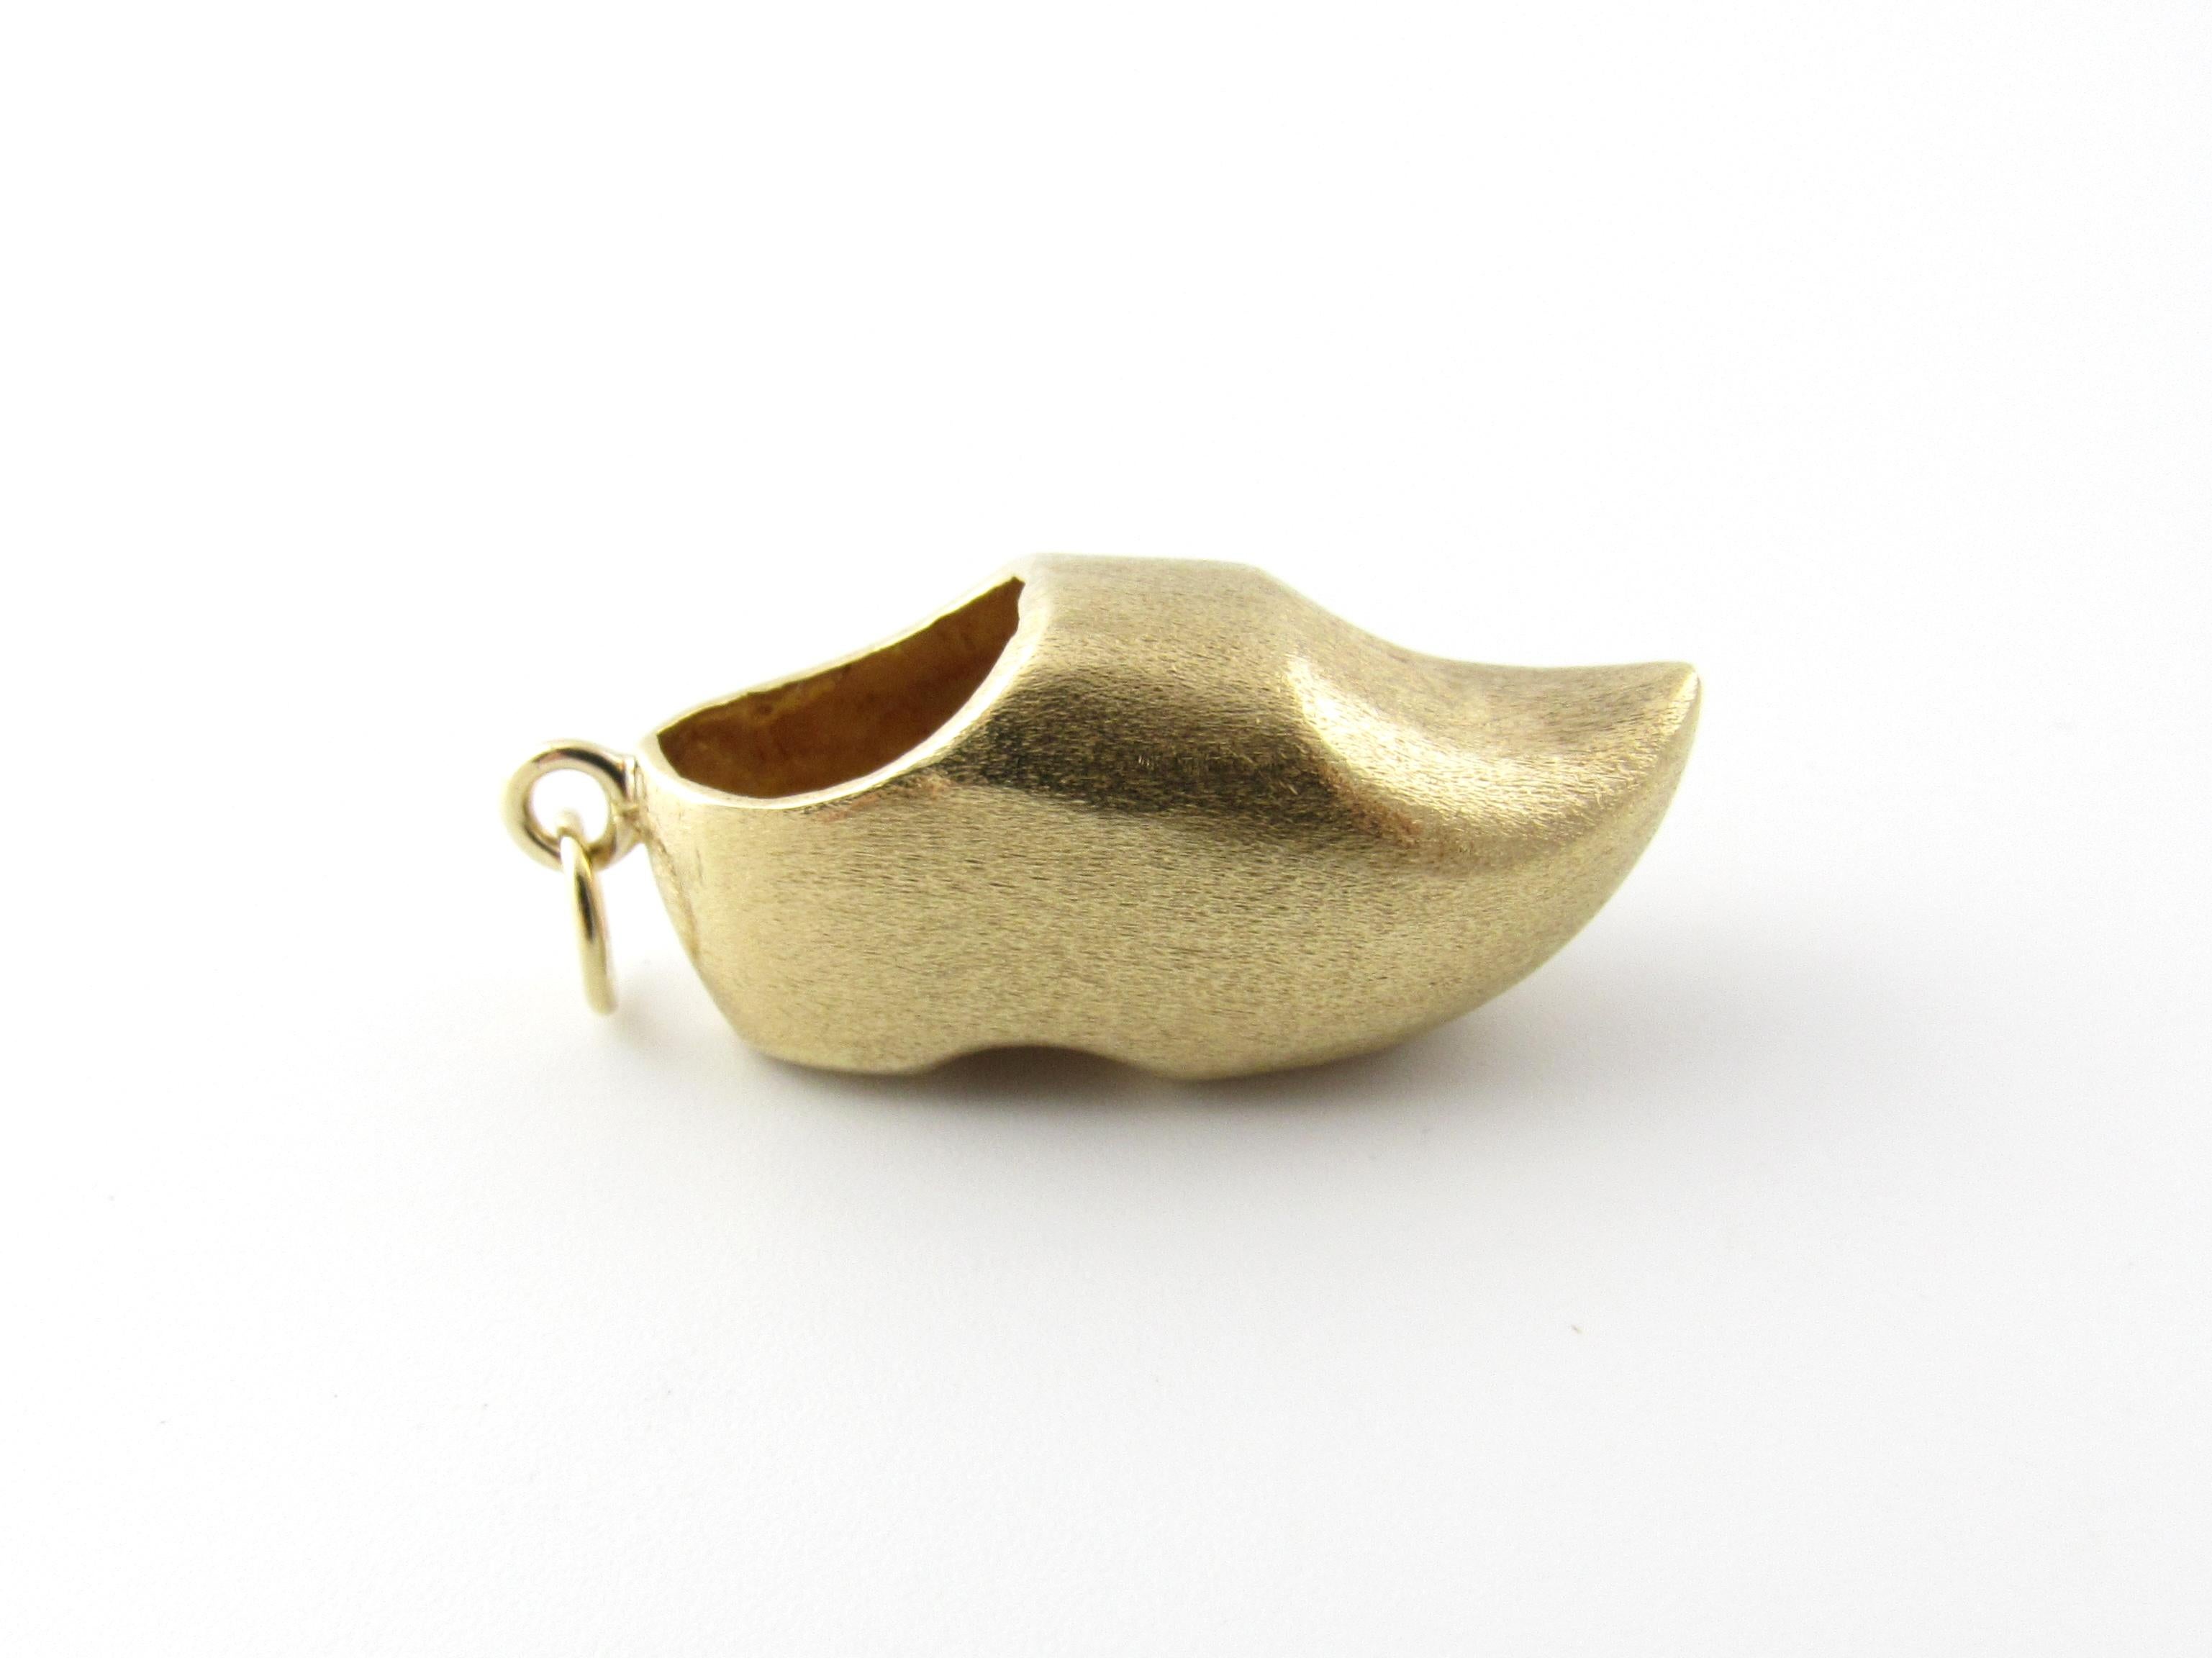 Vintage 14 Karat Yellow Gold Dutch Wooden Clog Charm

Wooden shoes are a Dutch tradition that date back to medieval times.

This lovely 3D charm features a beautifully detailed Dutch clog crafted in 14K yellow gold.

Size: 32 mm x 13 mm (actual